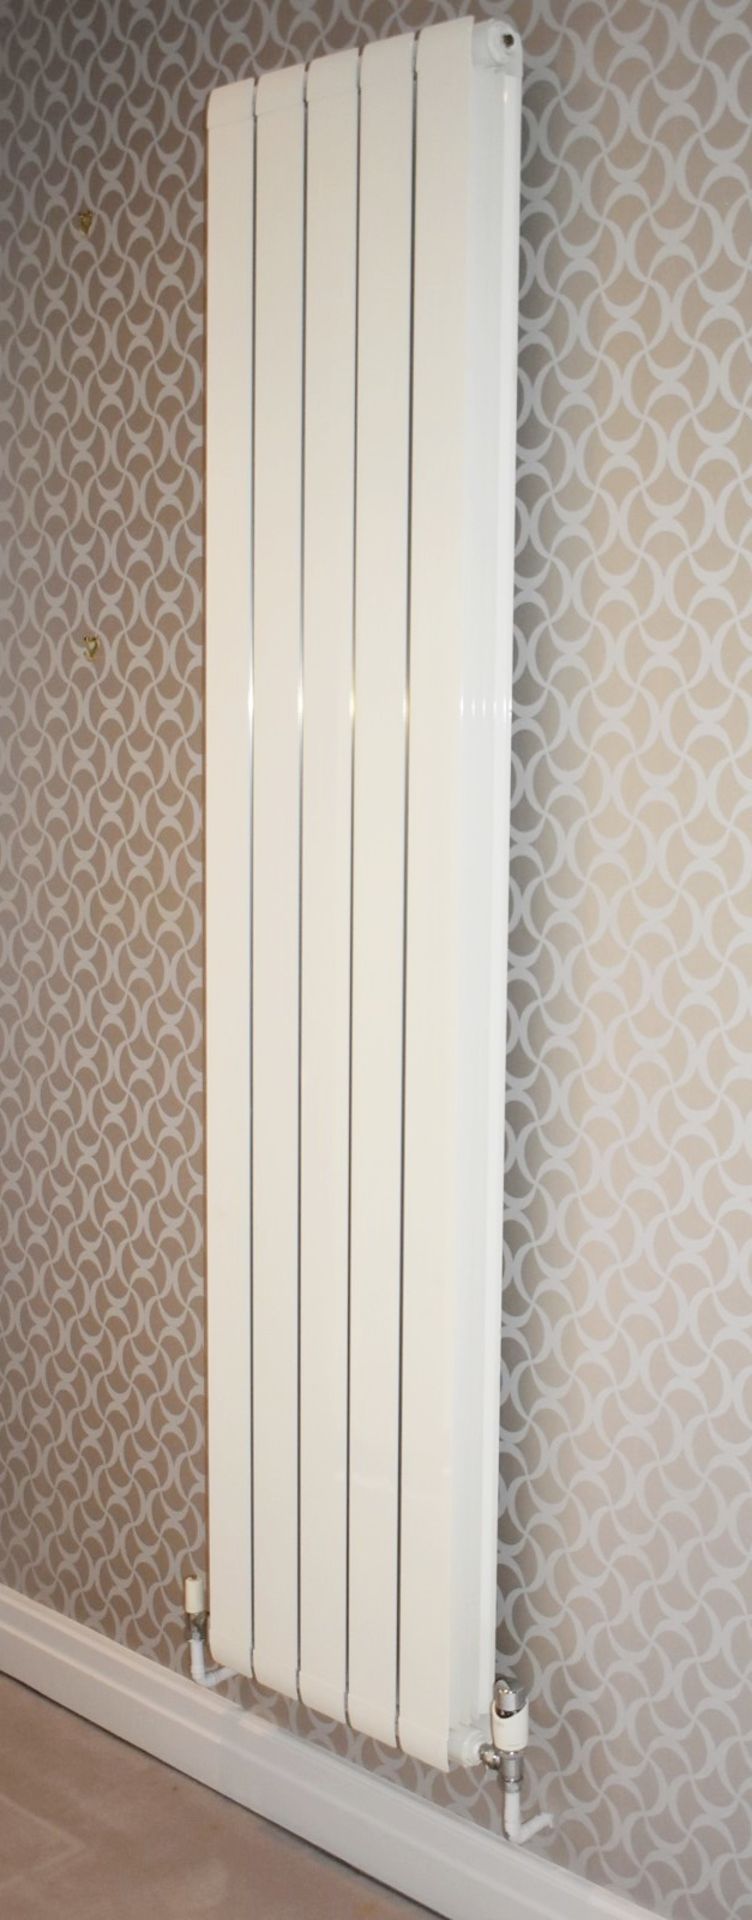 4 x Single Panel Vertical Wall Mounted Radiators - Ref: RR10 / LNG - CL781 - Location: Hale Barns